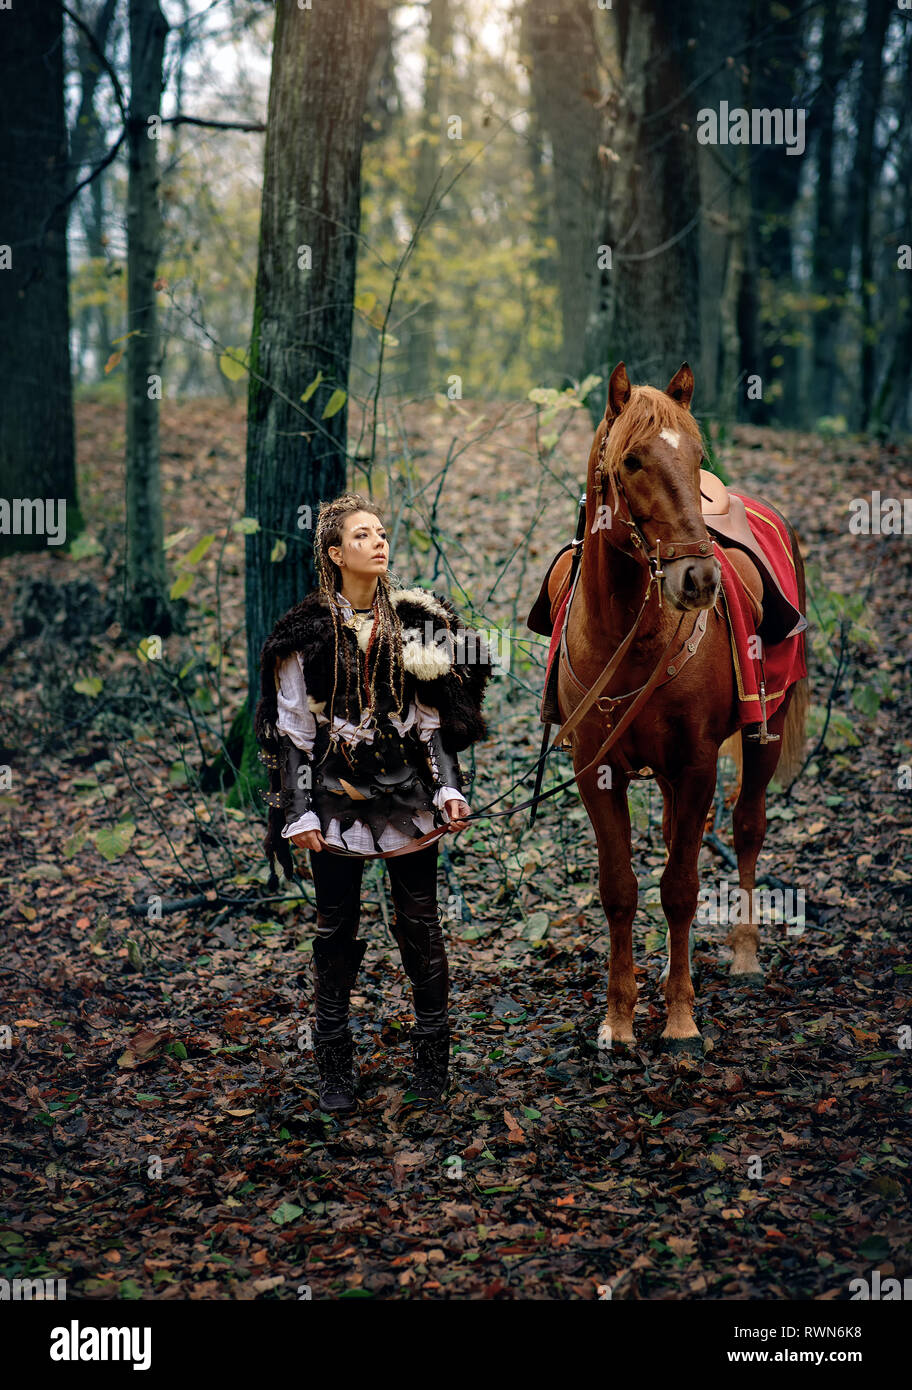 Warrior Woman and a horse in the woods. Scandinavian viking with her horse in traditional clothes with fur collar, war makeup, forest. Reconstruction  Stock Photo